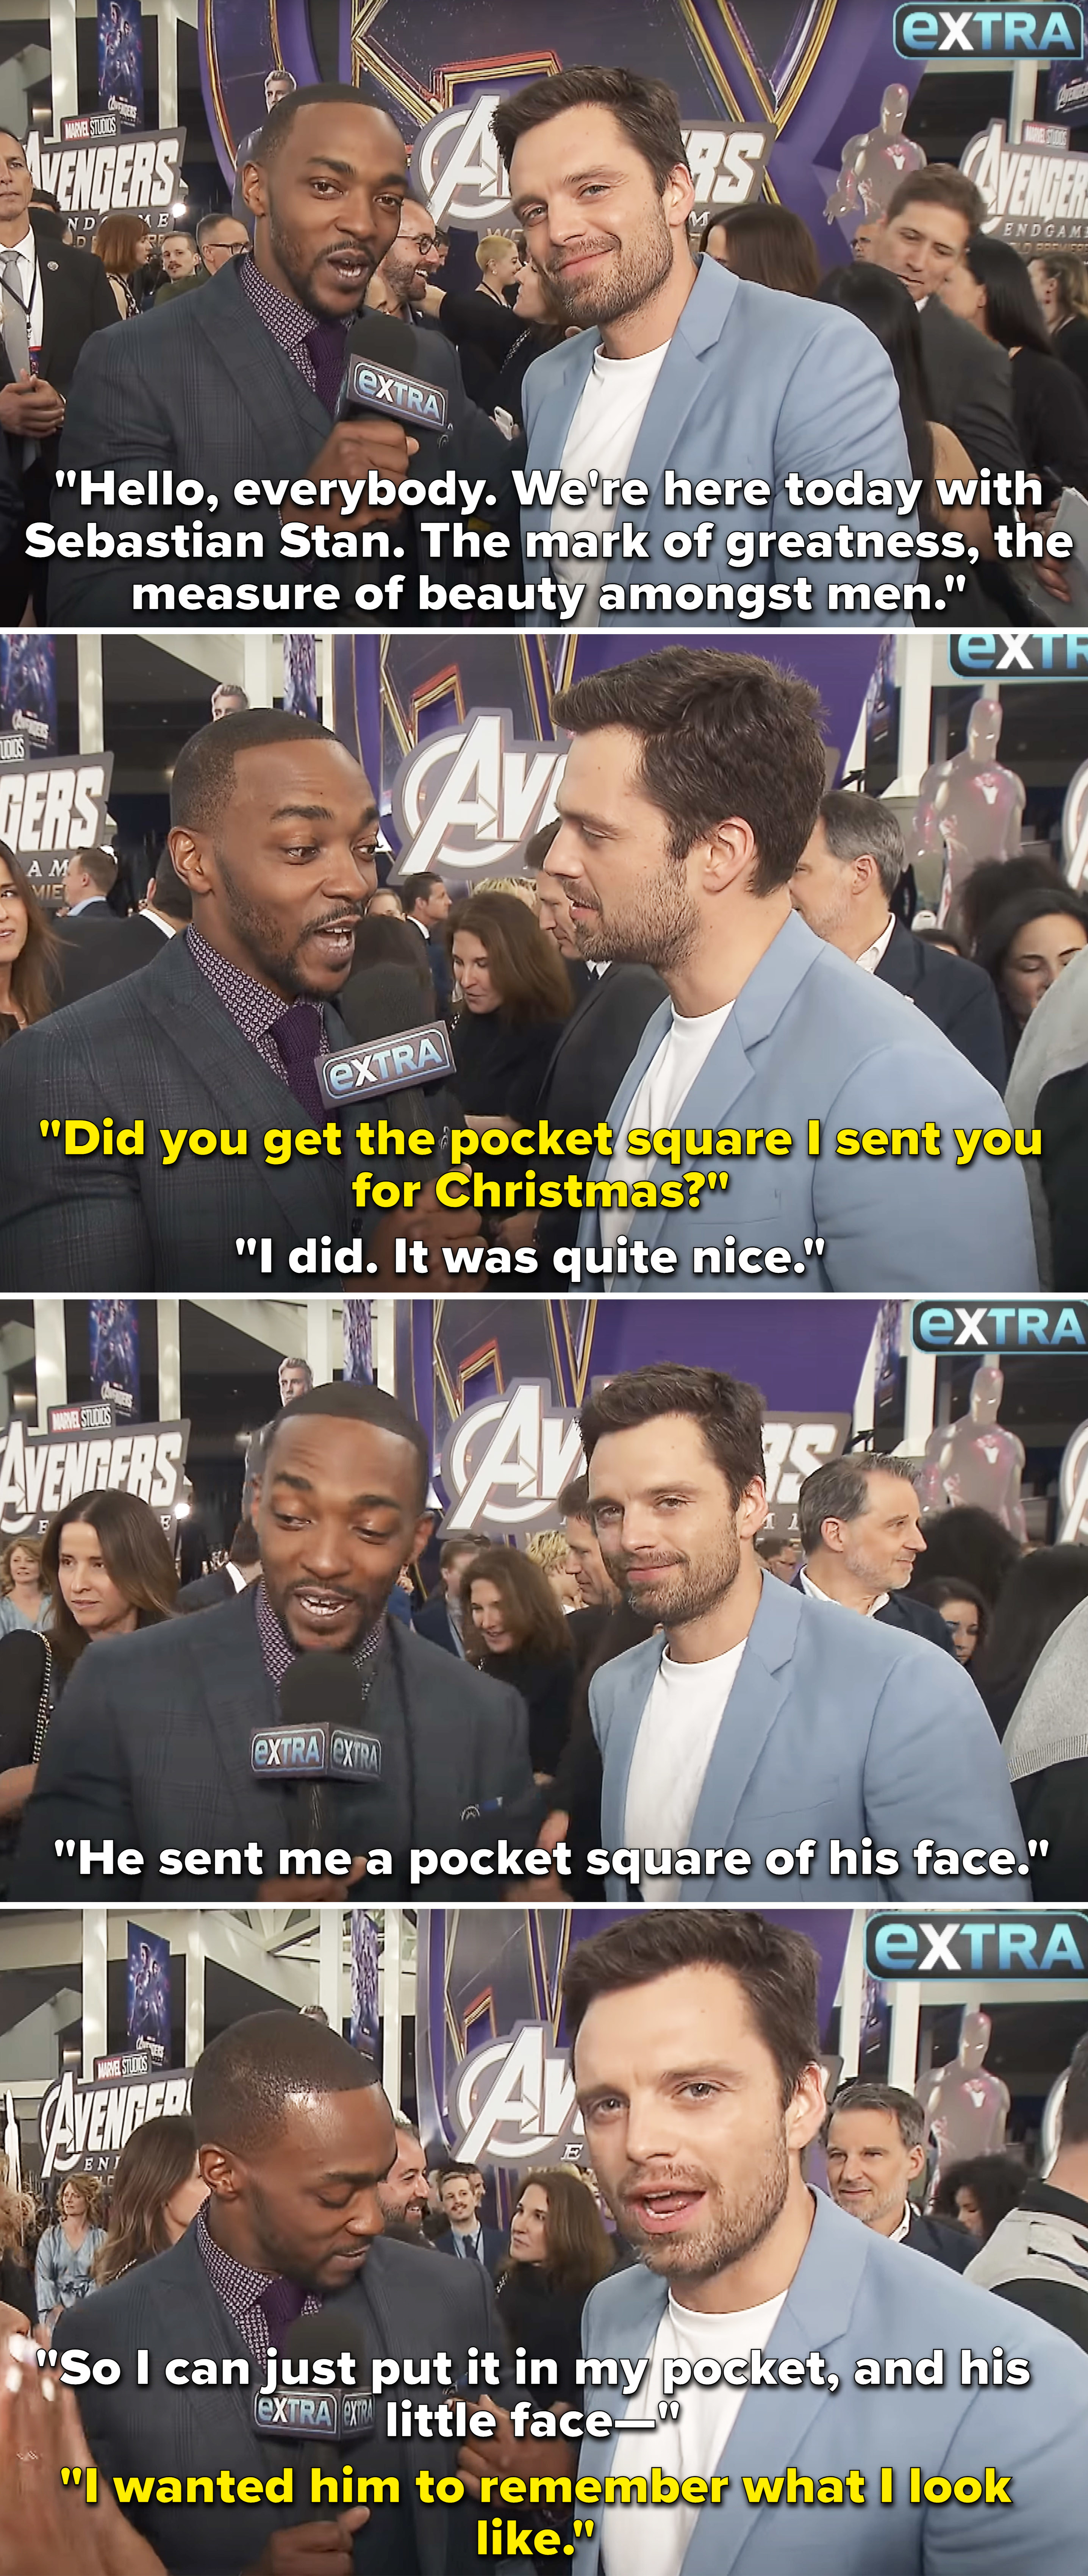 Anthony Mackie interviewing Sebastian Stan  and Sebastian Stan saying he sent him a pocket square for Christmas